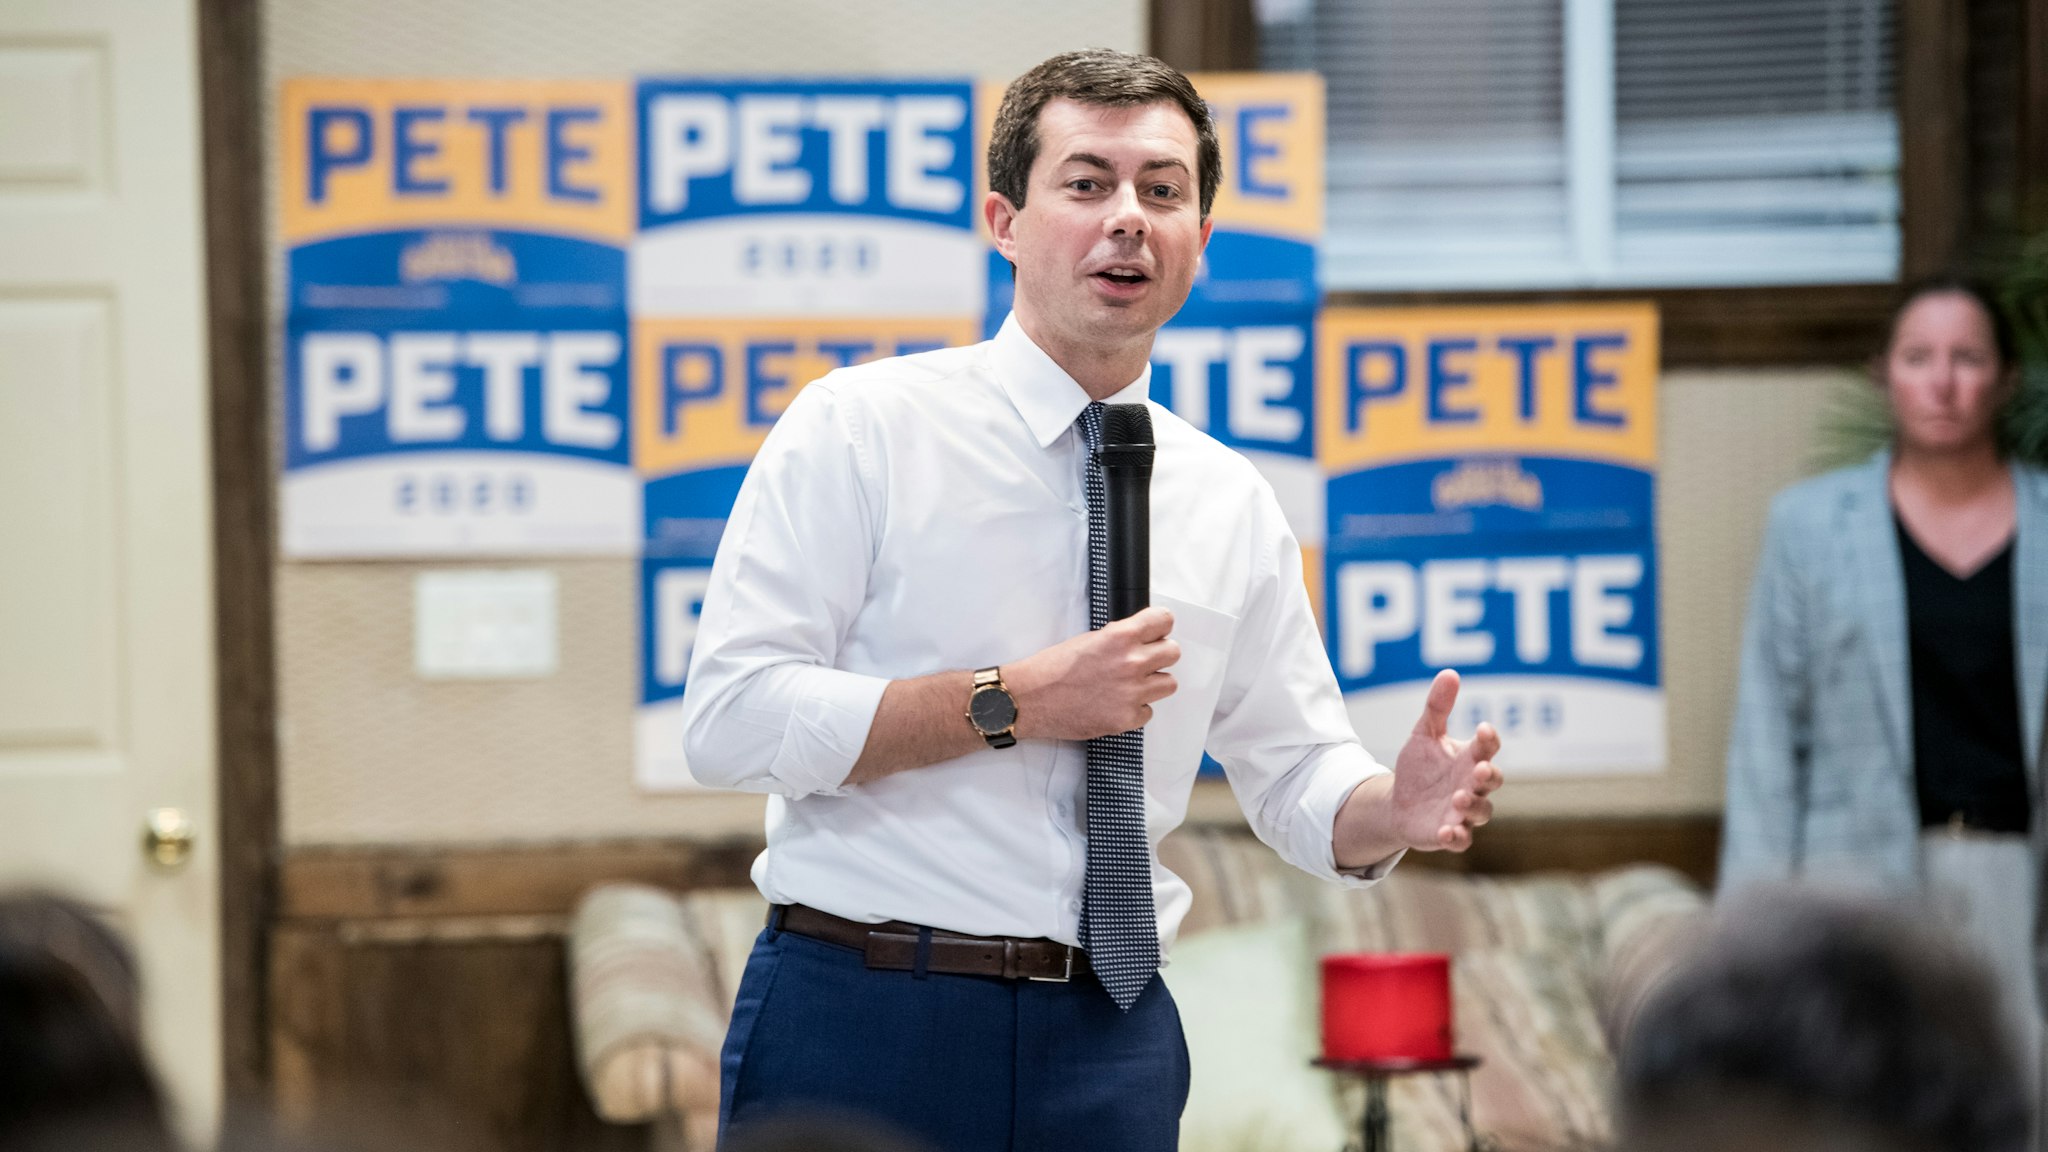 Democratic presidential candidate, South Bend, Indiana Mayor Pete Buttigieg talks to supporters during a canvassing kickoff event October 27, 2019 in Rock Hill, South Carolina. Many presidential hopefuls campaigned in the early primary state over the weekend, scheduling stops around a criminal justice forum in the state capital. (Photo by Sean Rayford/Getty Images)